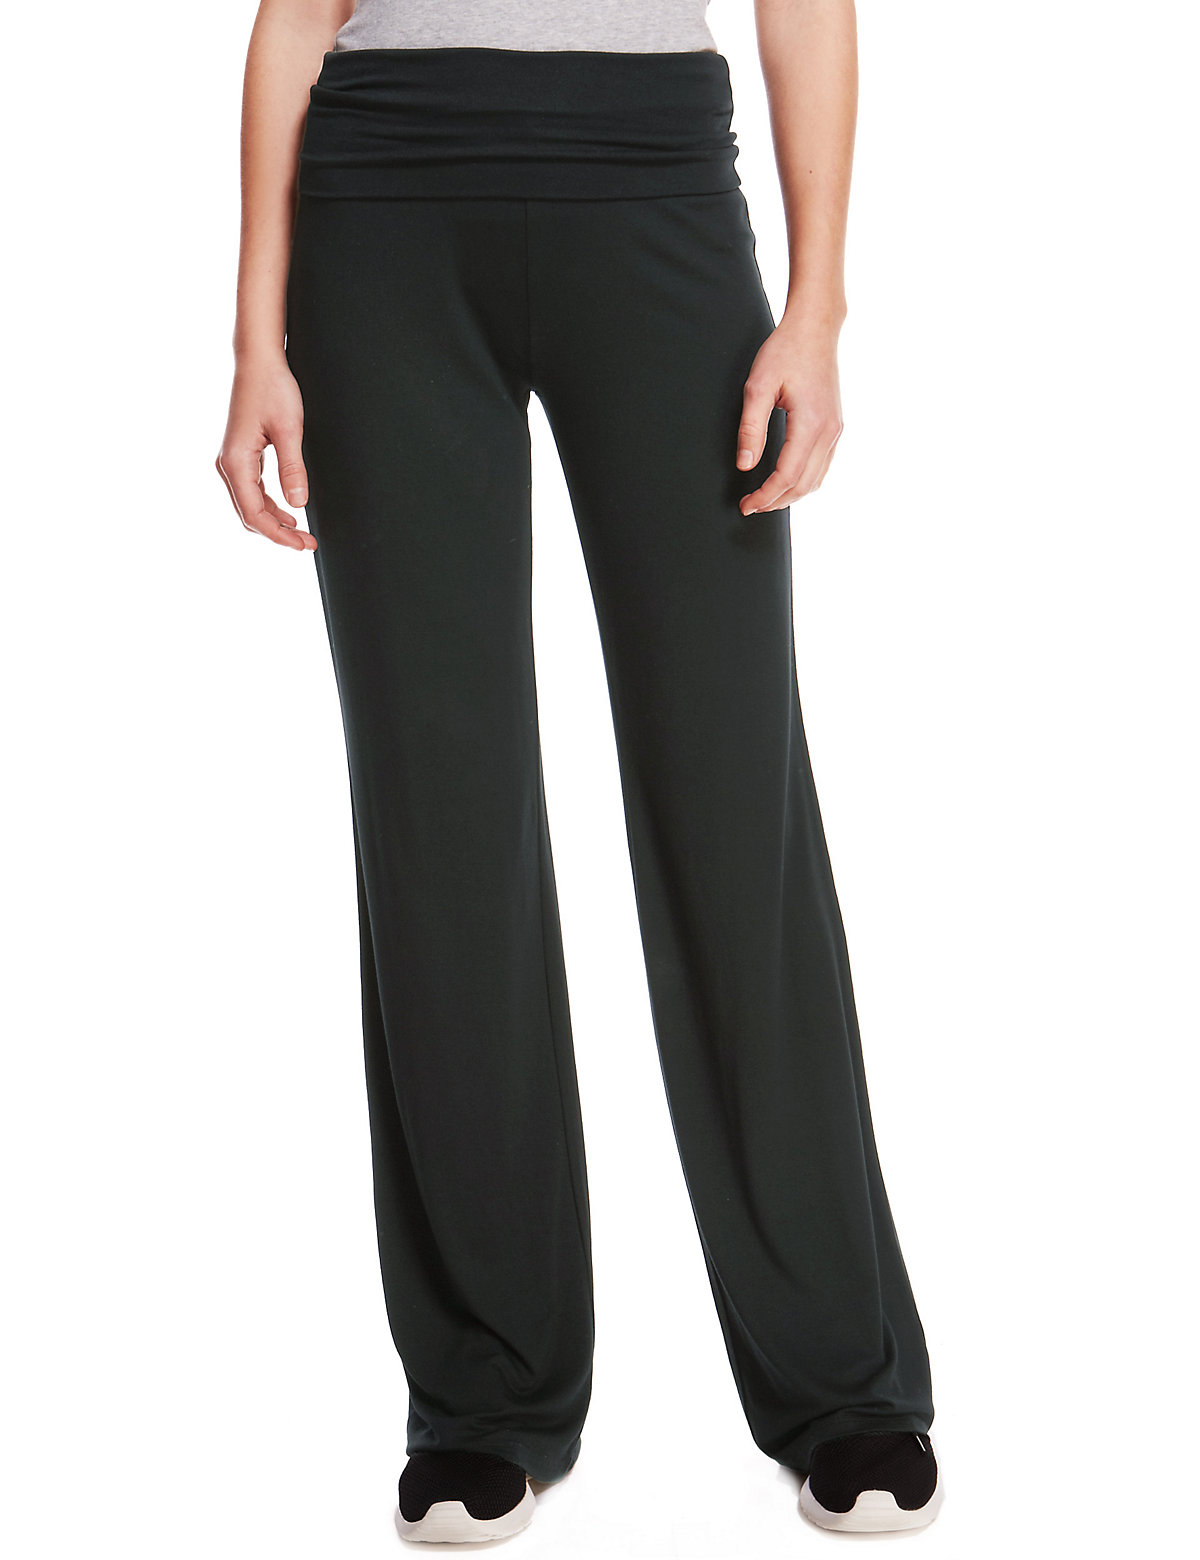 Marks and Spencer - - M&5 BLACK Roll Waist Yoga Pants - Size 14 to 24